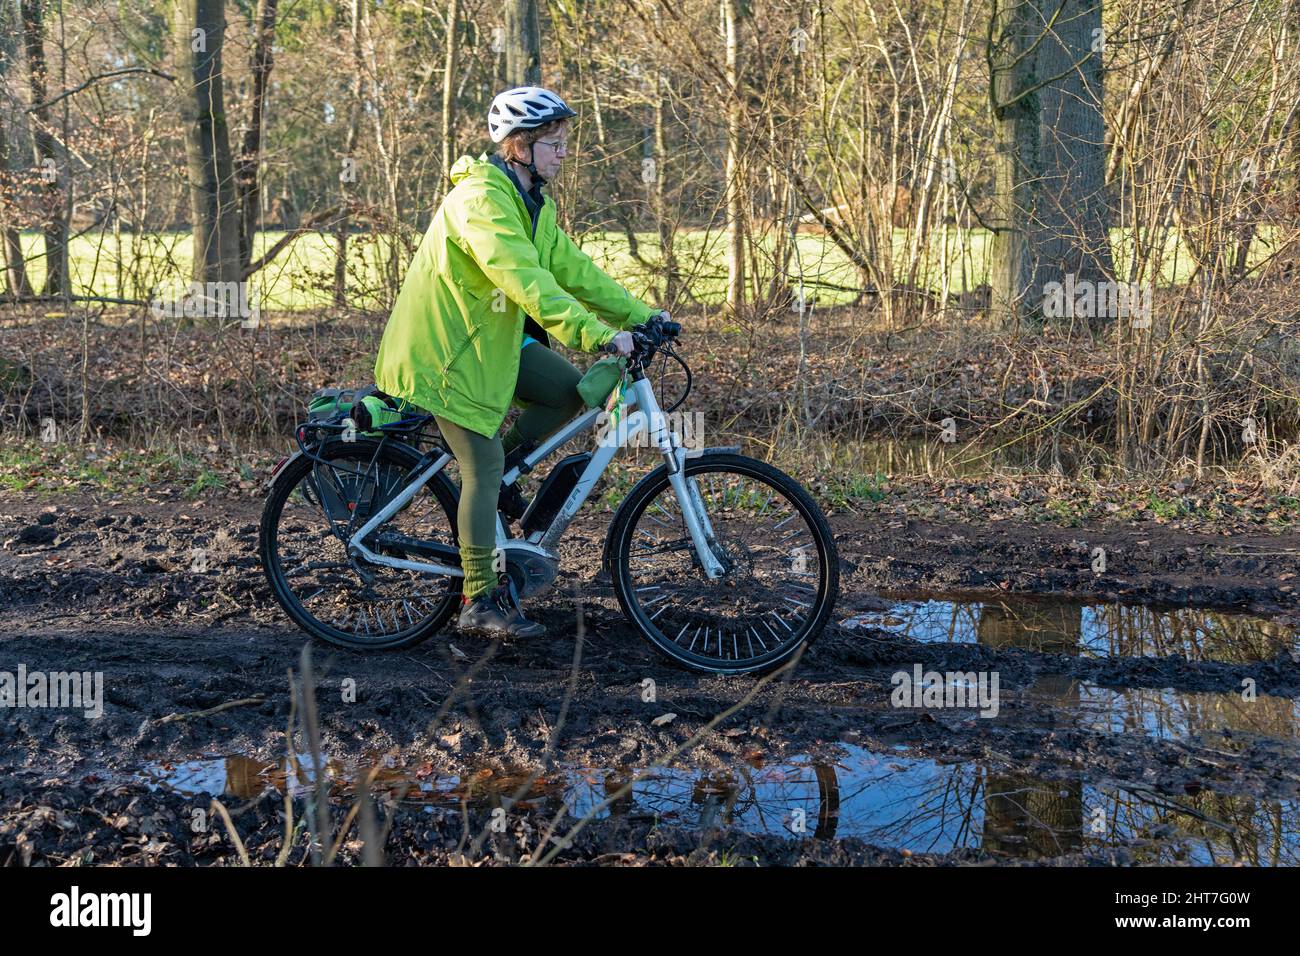 Woman over fifty doing a cycling tour with her e-bike along a muddy path and through puddles, Lueneburg, Lower Saxony, Germany Stock Photo